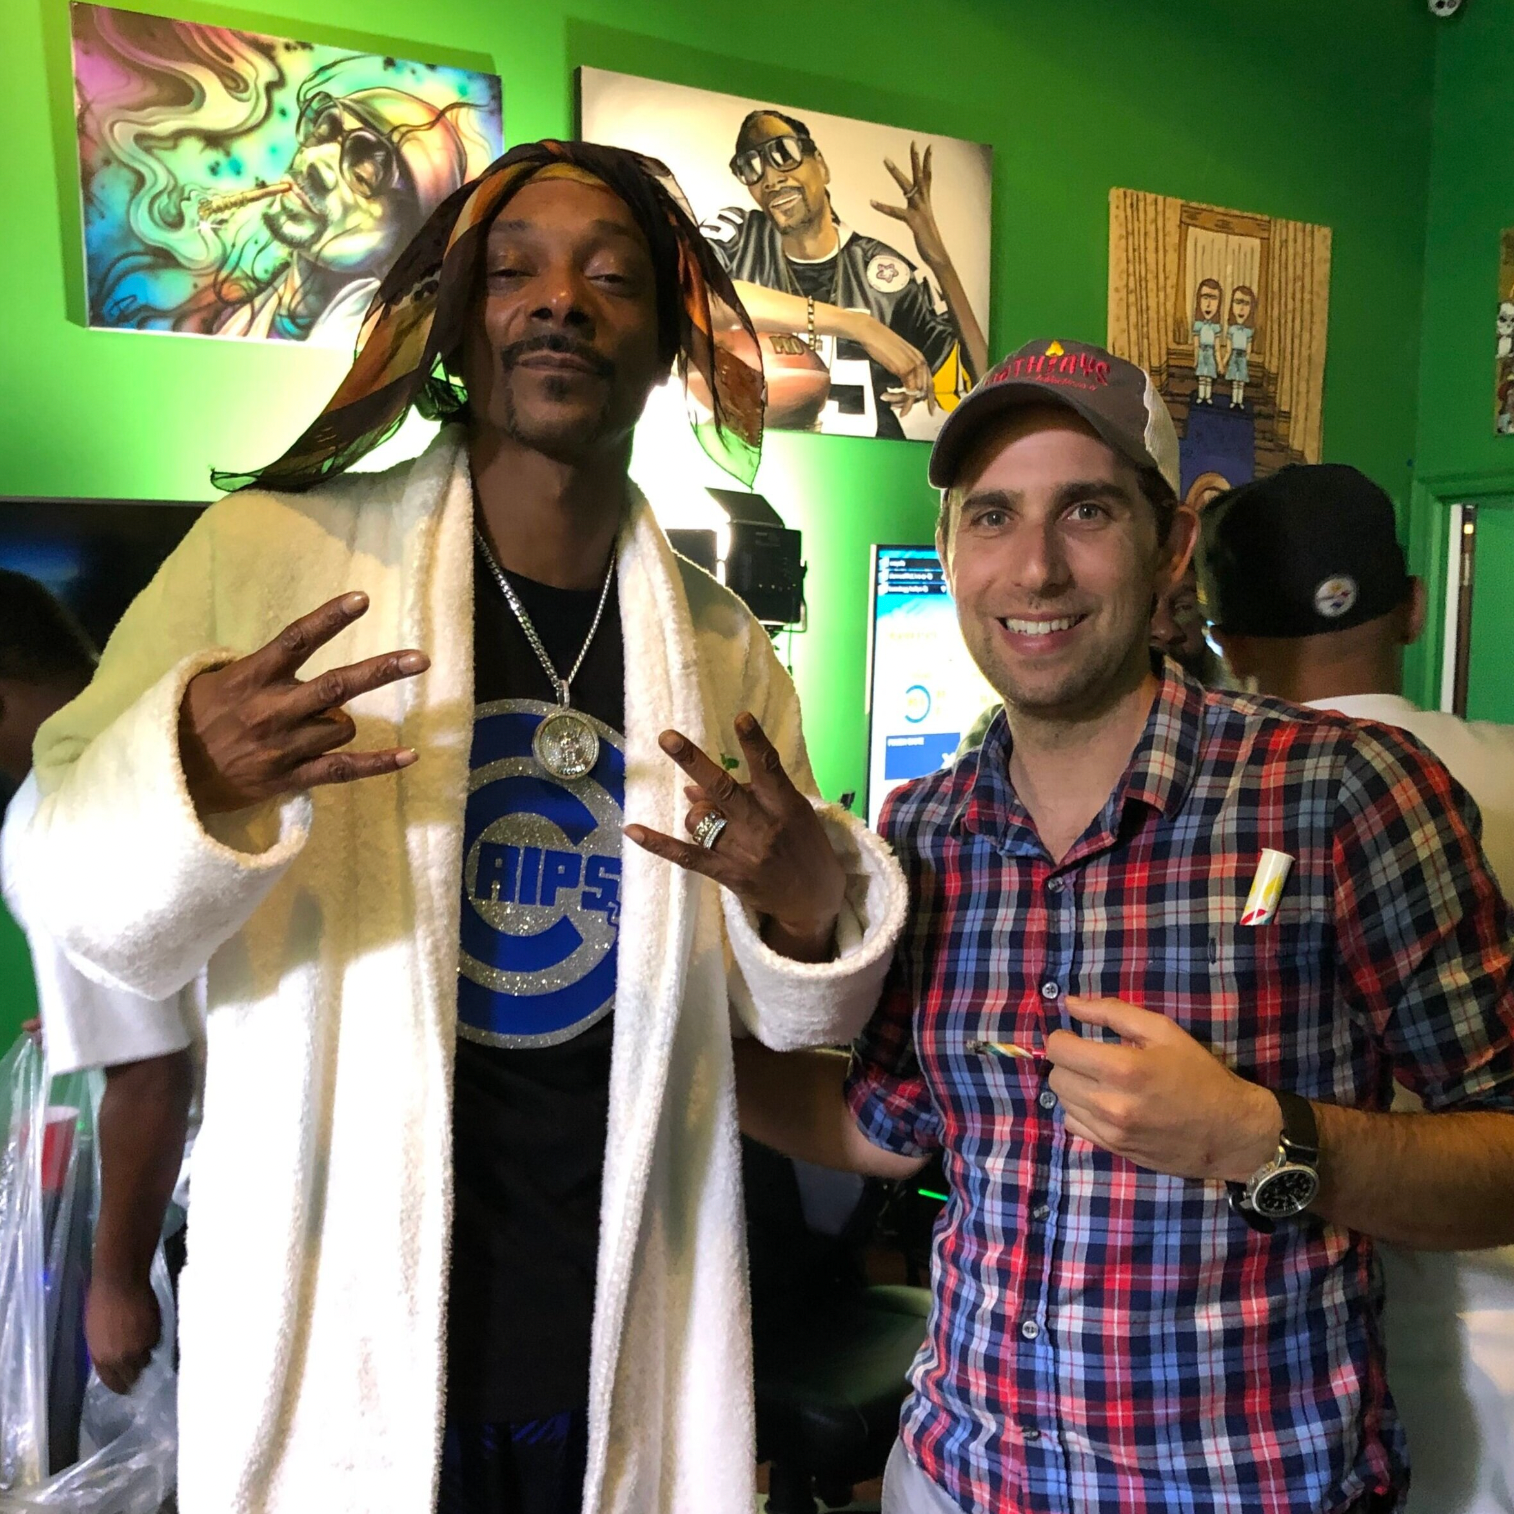 Hanging with Snoop Dogg